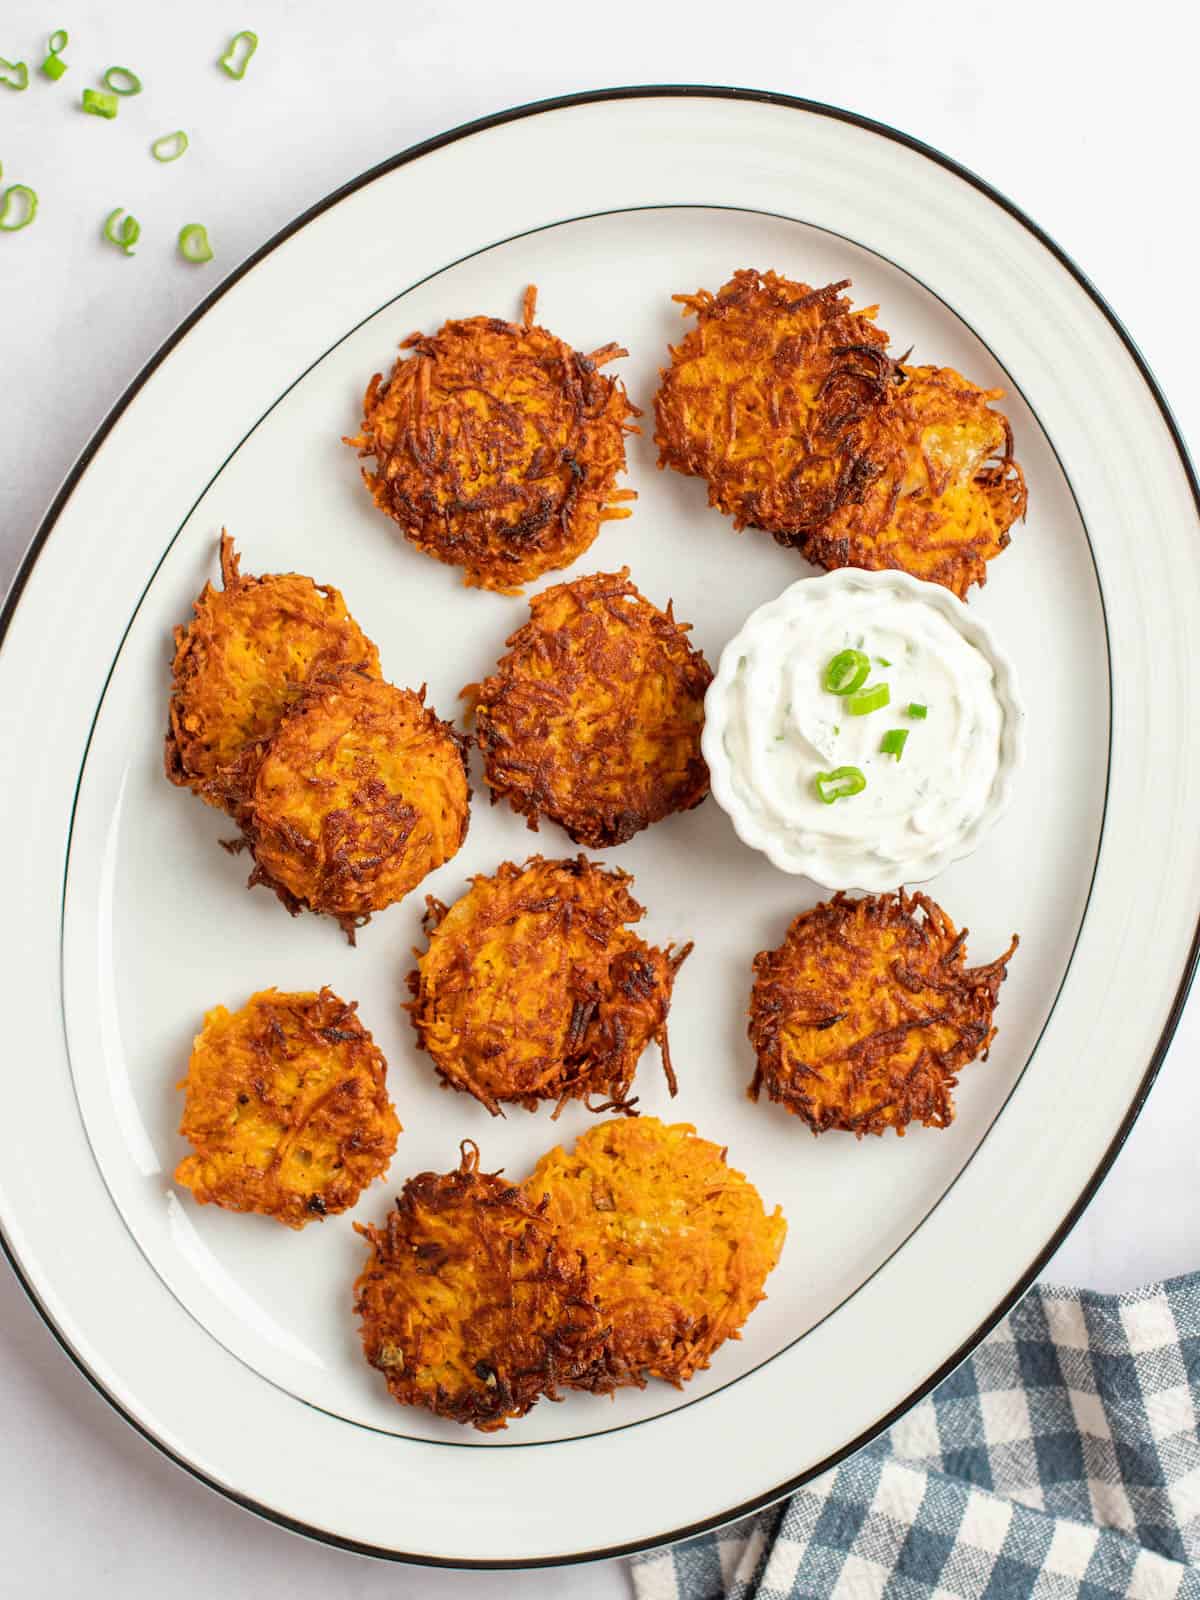 Crispy sweet potato latkes on a plate topped with a side of sour cream.